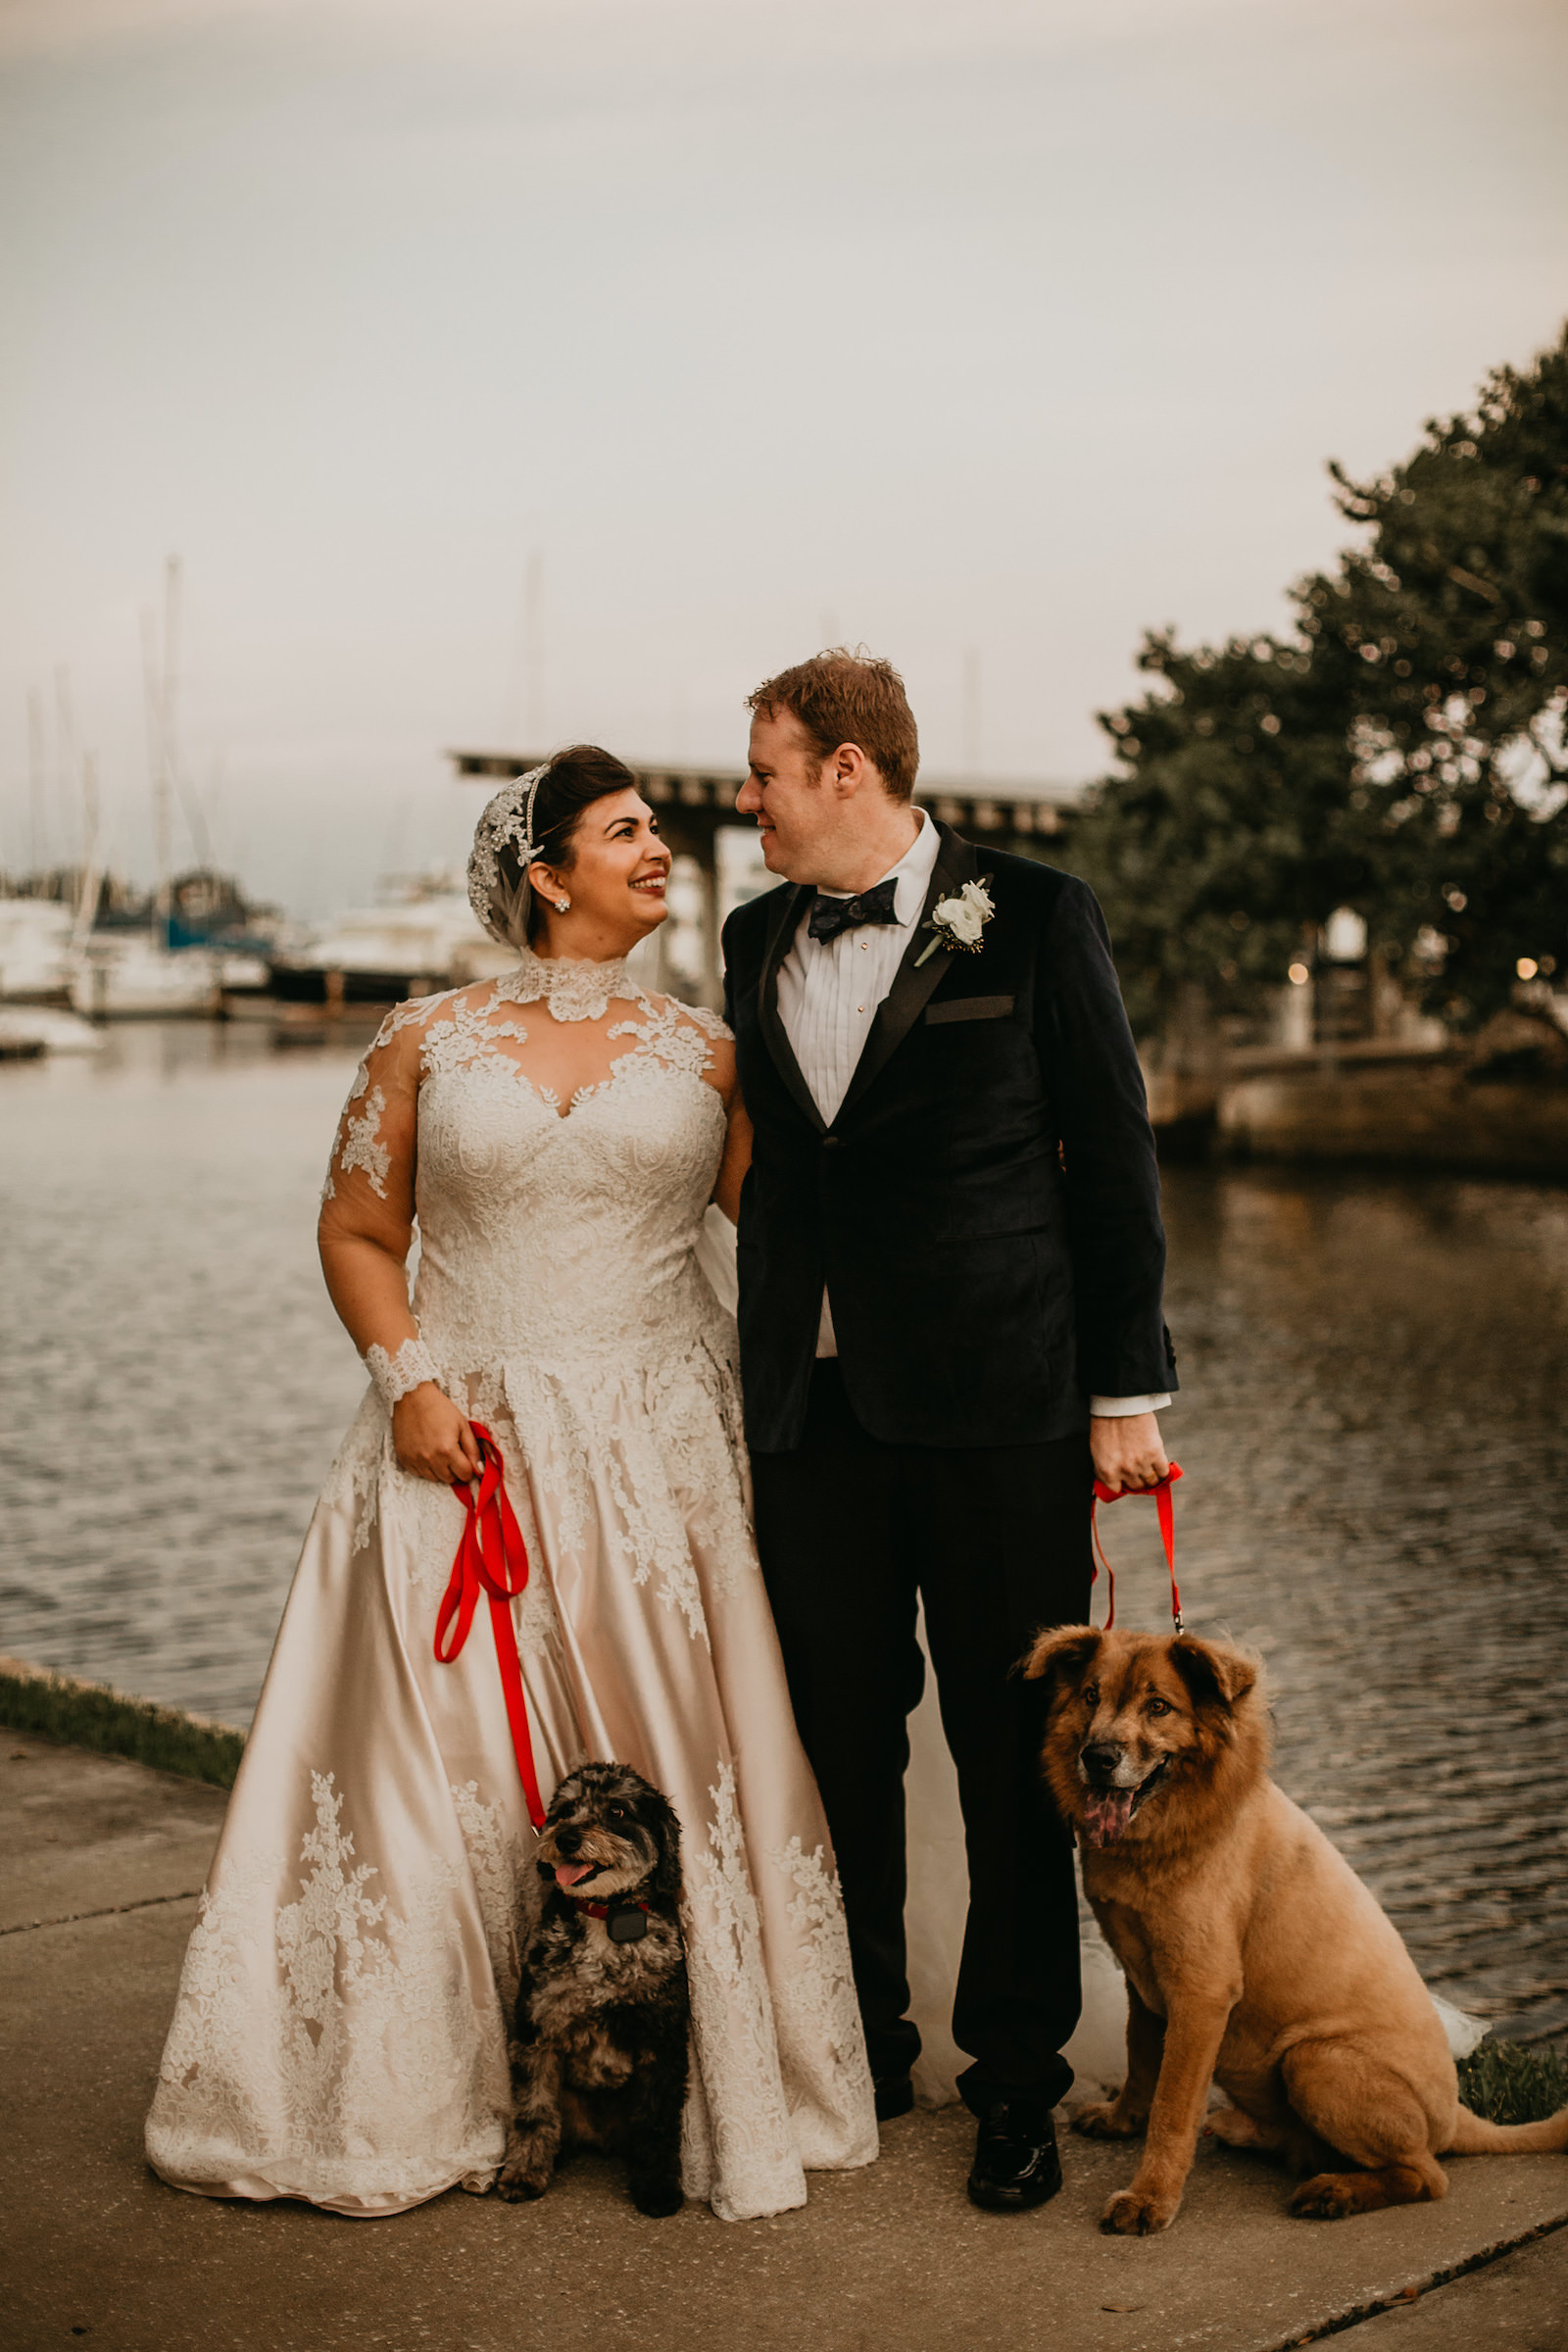 Downtown St. Petersburg Florida Marina Outdoor Bride and Groom Portrait | Champagne and Ivory Lace Allure Bridal Ball Gown with Sweetheart Neckline and Illusion Lace Bodice and Sleeves with Cathedral Veil | Groom Wearing Classic Black Tuxedo Suit with Bow Tie | Wedding Pets Dogs of Honor